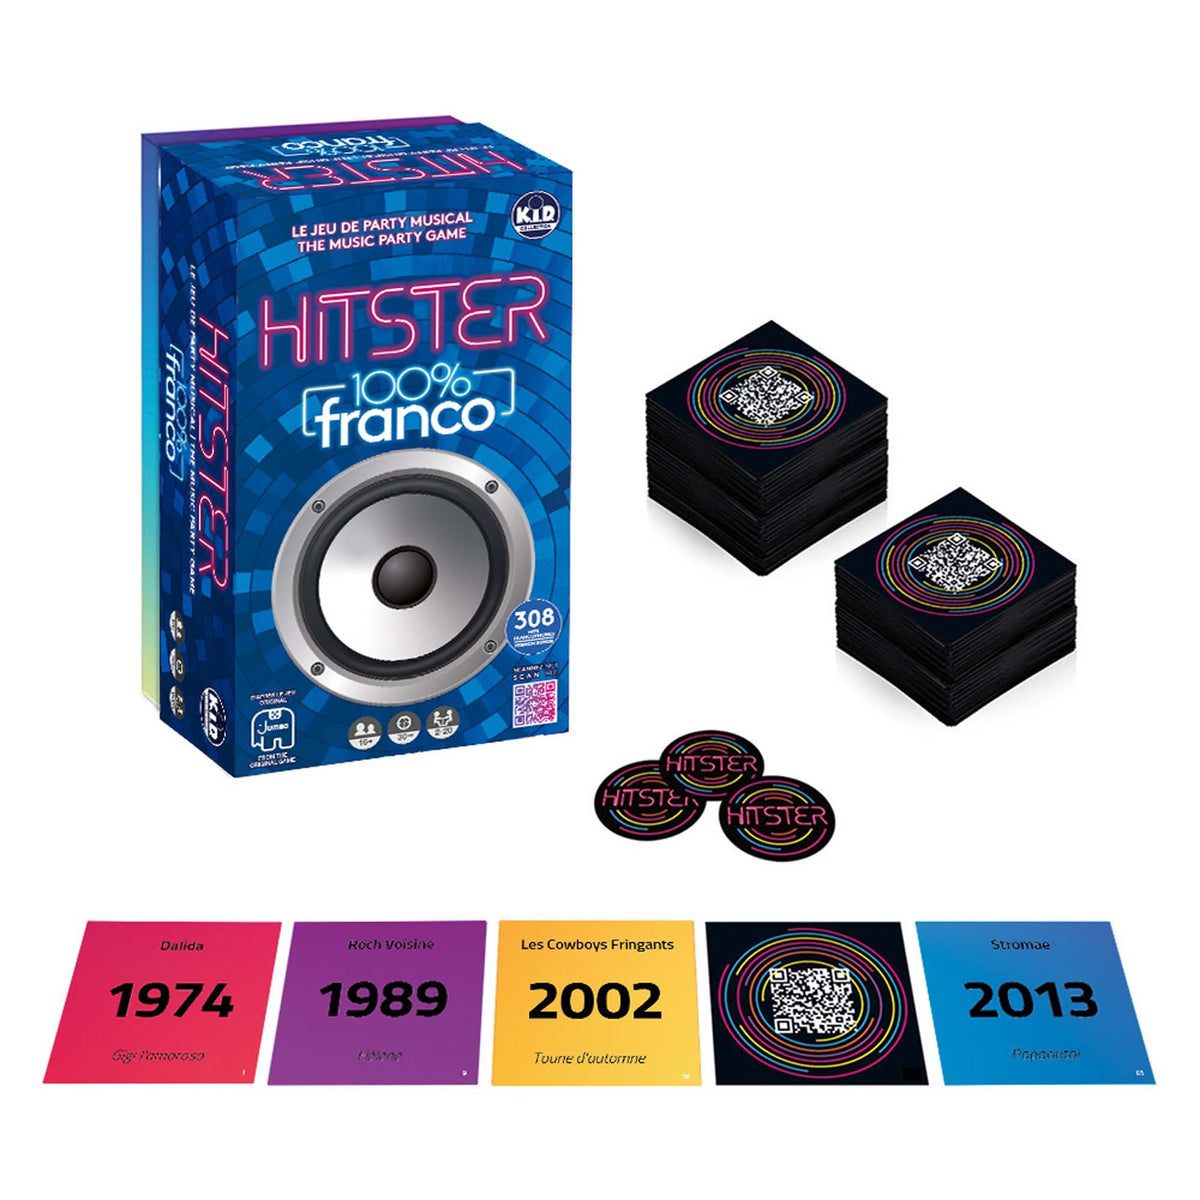 JOUET K.I.D. INC. Toys & Games Hitster Franco: The Musical Party Game, 1 Count 629270810401